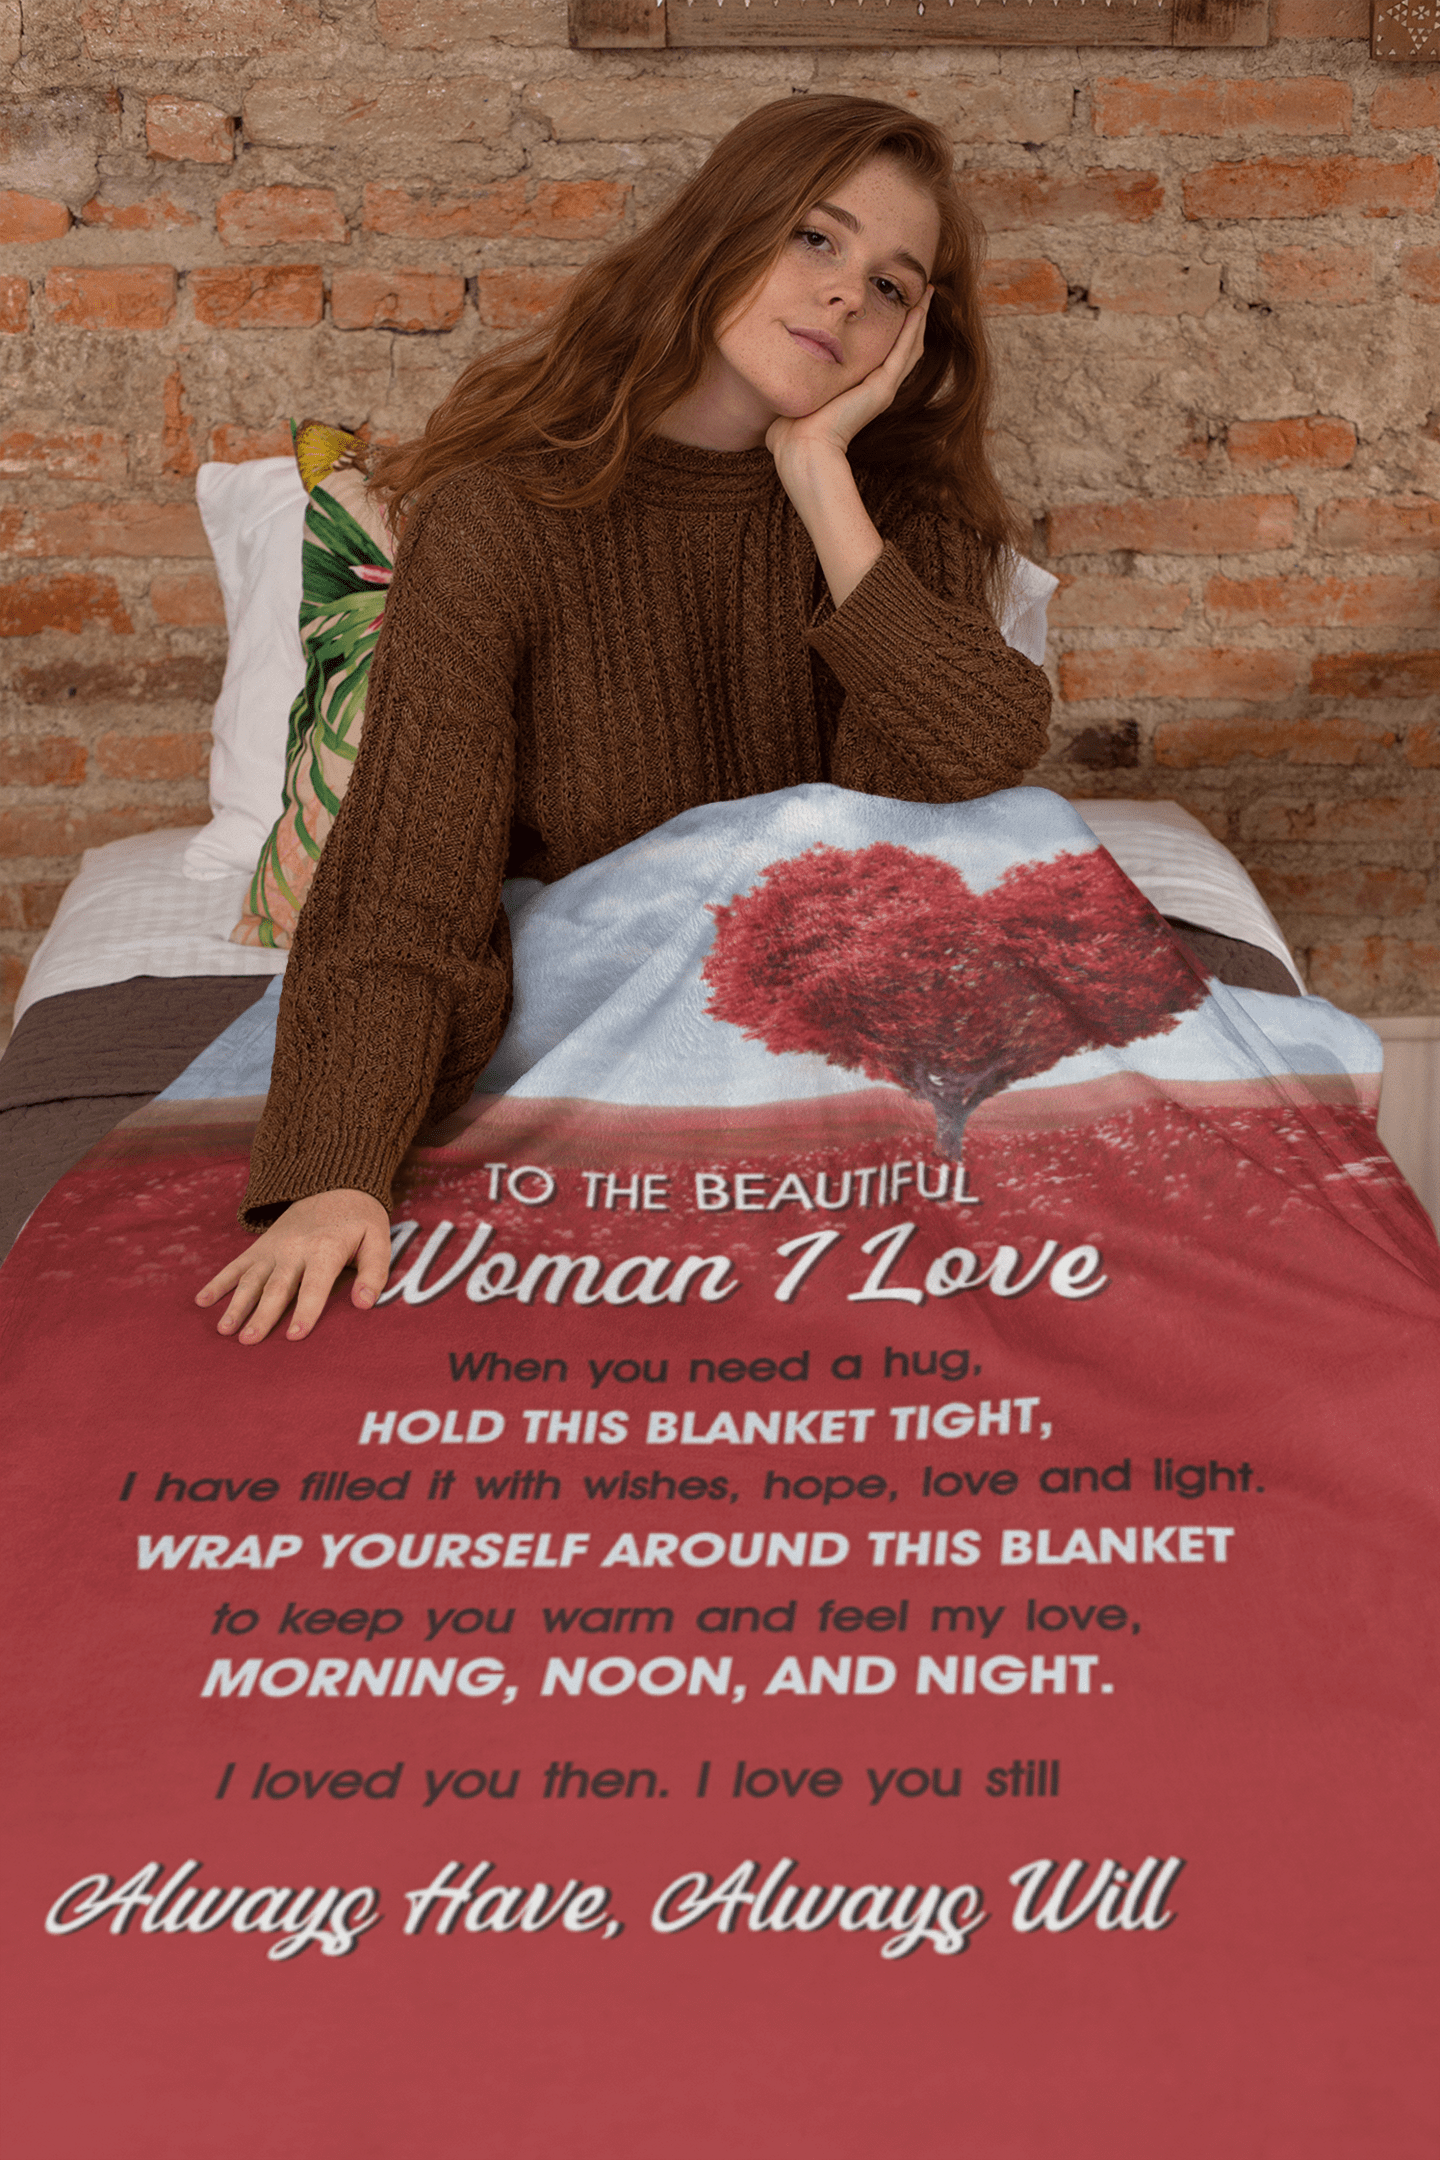 To The Woman I Love Then, I Love You Still 3D Fleece Blanket